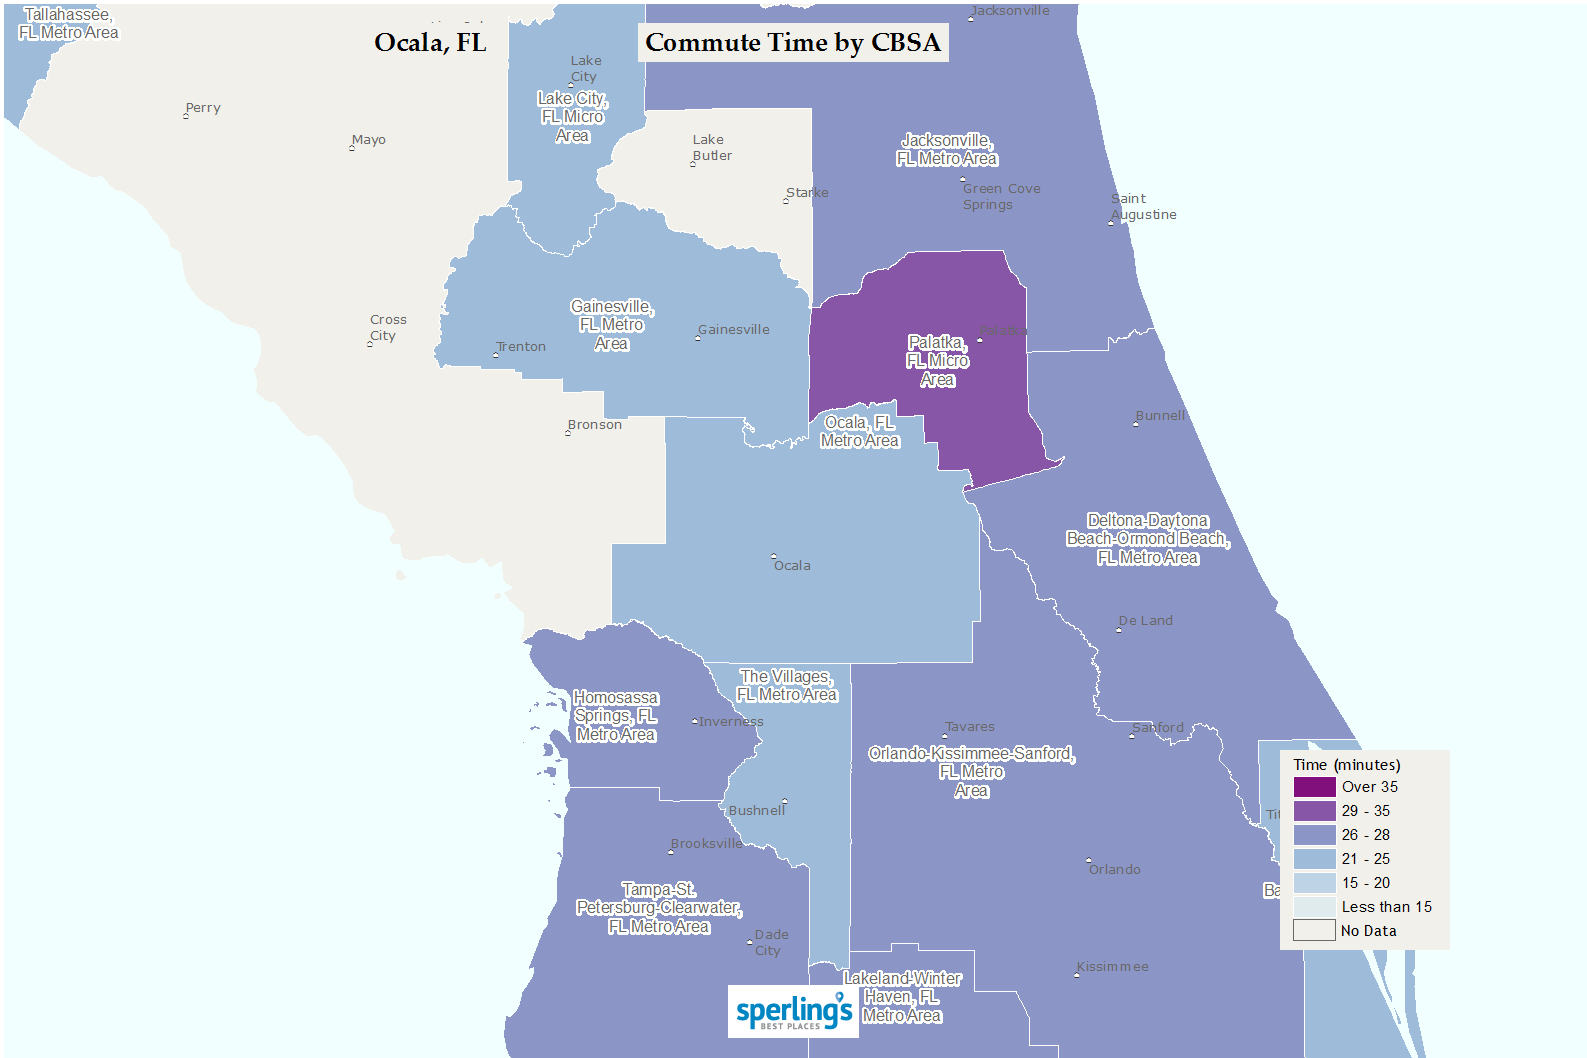 Best Places To Live | Compare Cost Of Living, Crime, Cities, Schools - Belleview Florida Map